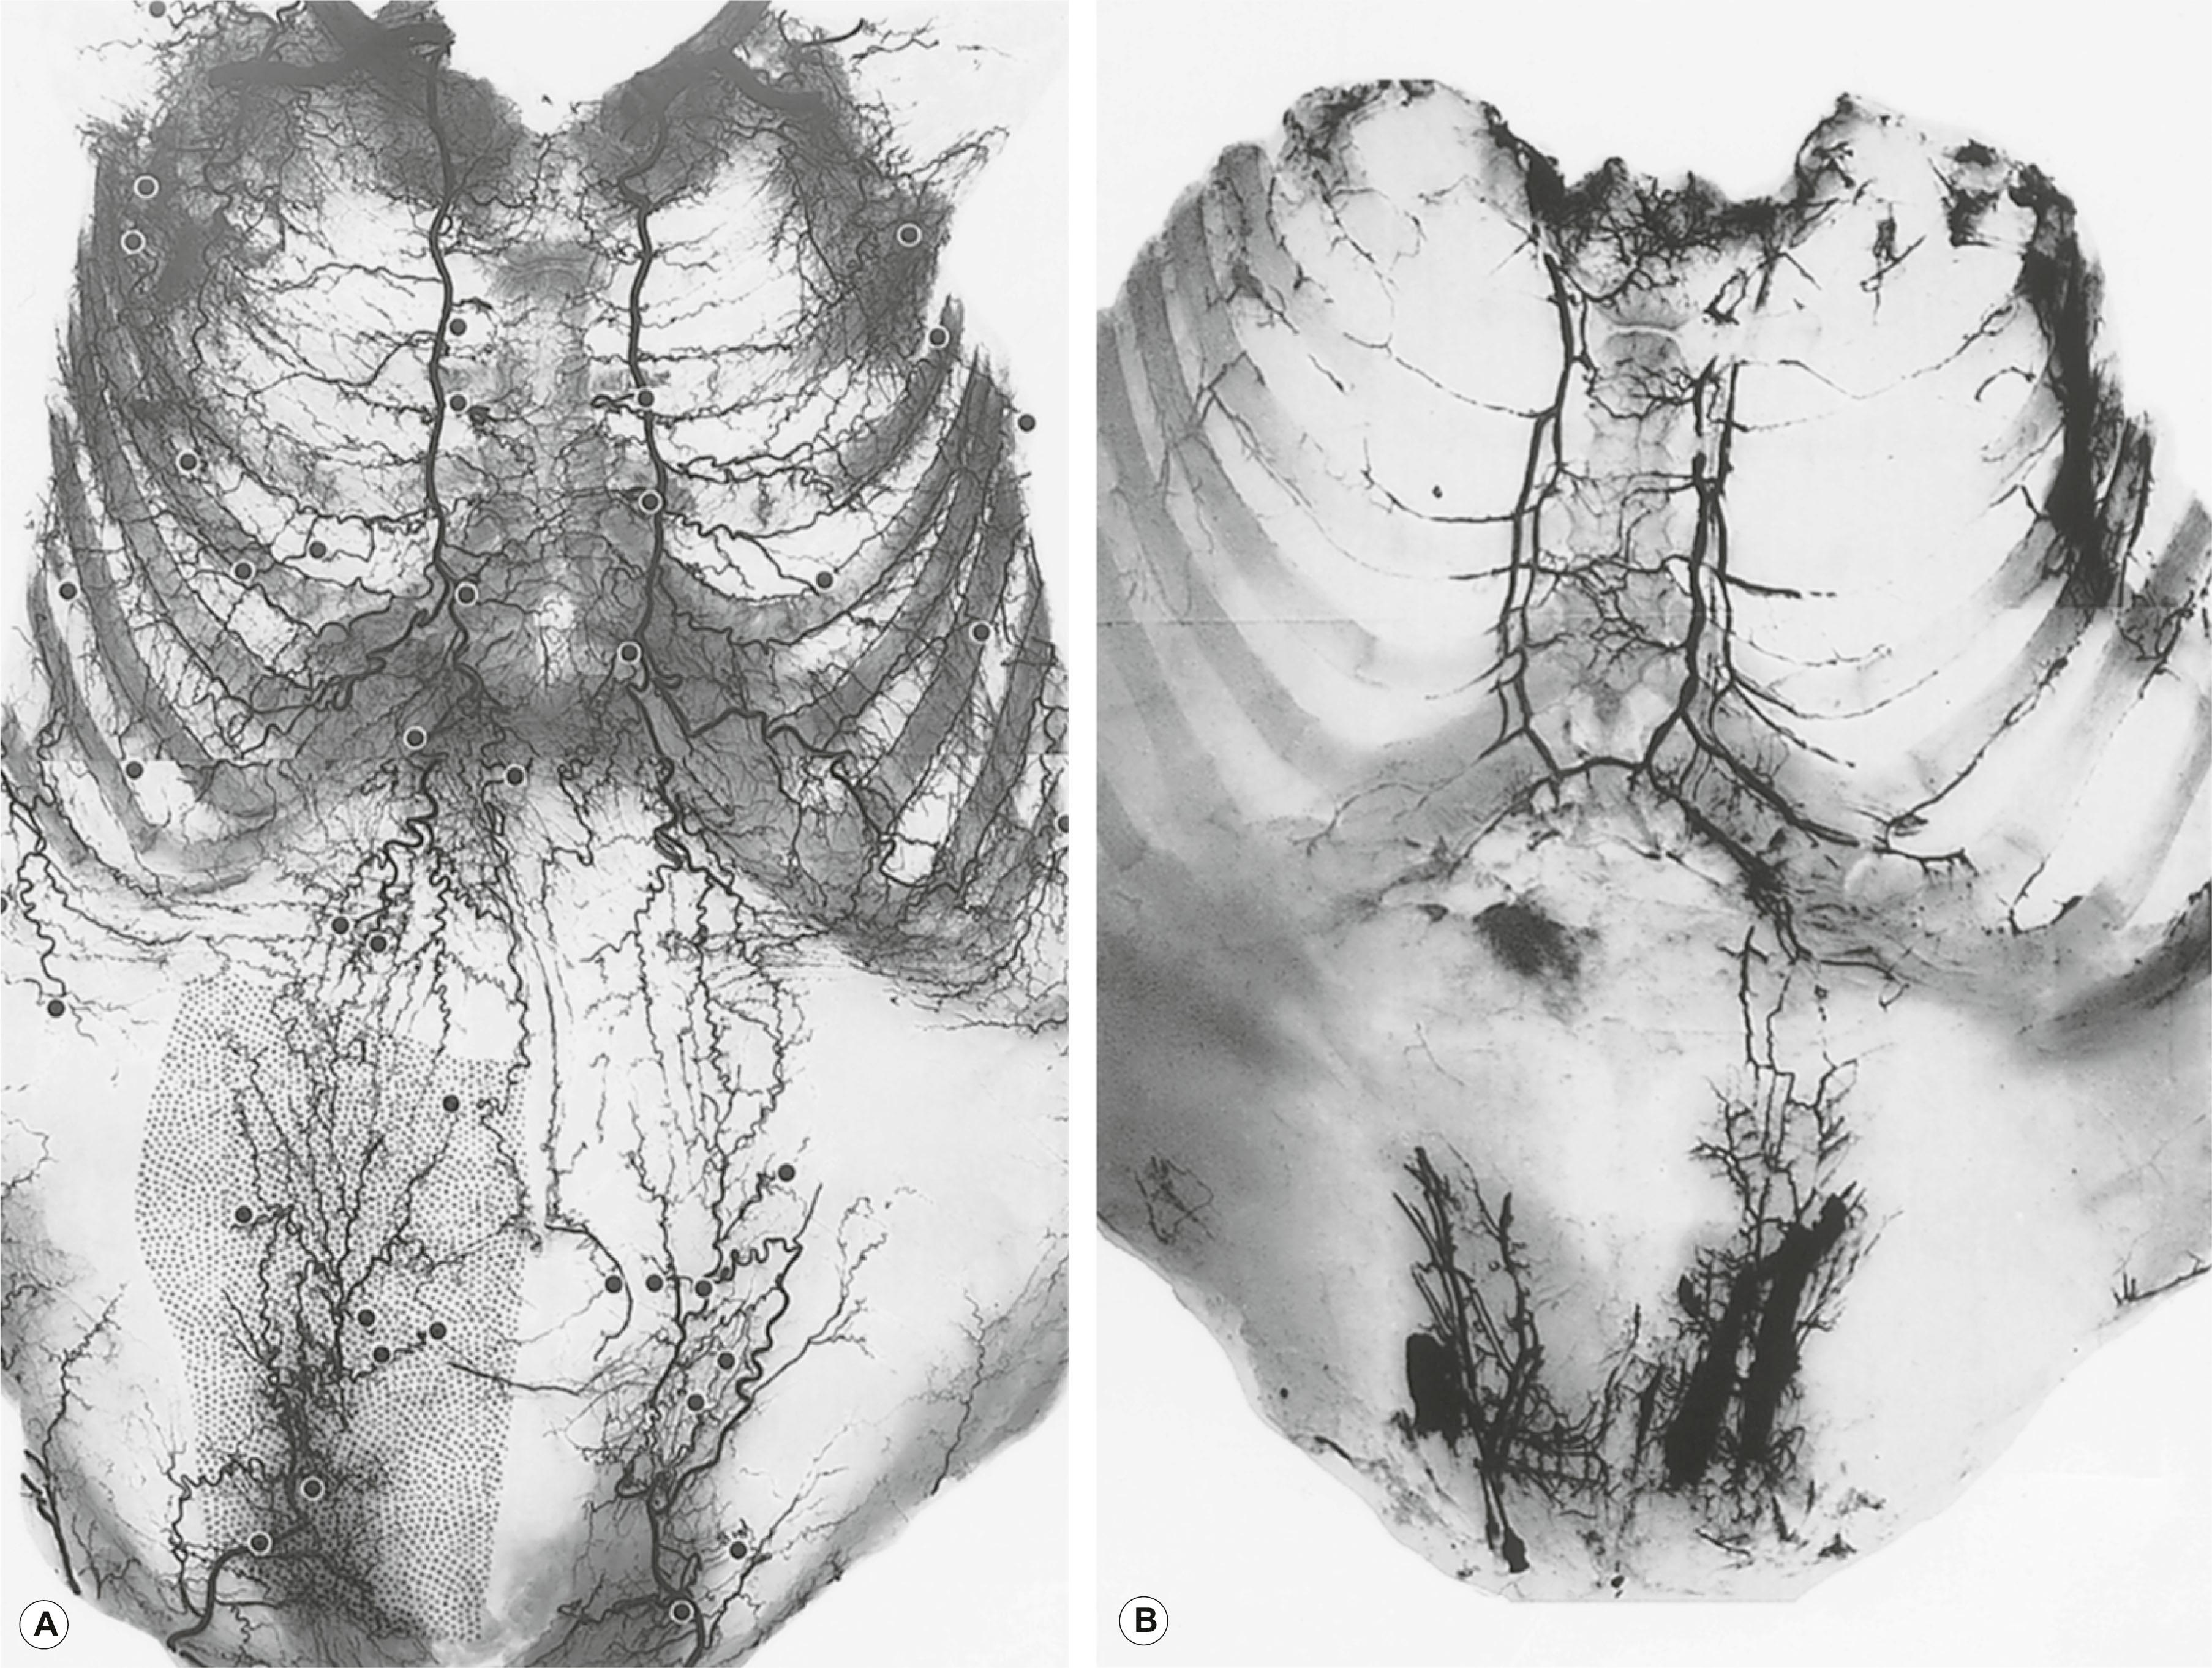 Figure 23.13, (A) Arterial and (B) venous studies of the anterior torso. Note the “corkscrew” choke arteries that link adjacent territories in the arterial study and the mixture that has extruded from the deep inferior epigastric veins as a result of the resistance of the valves. Radiographic lead beads identify the origin of the cutaneous perforators from their source vessels in the arterial study.